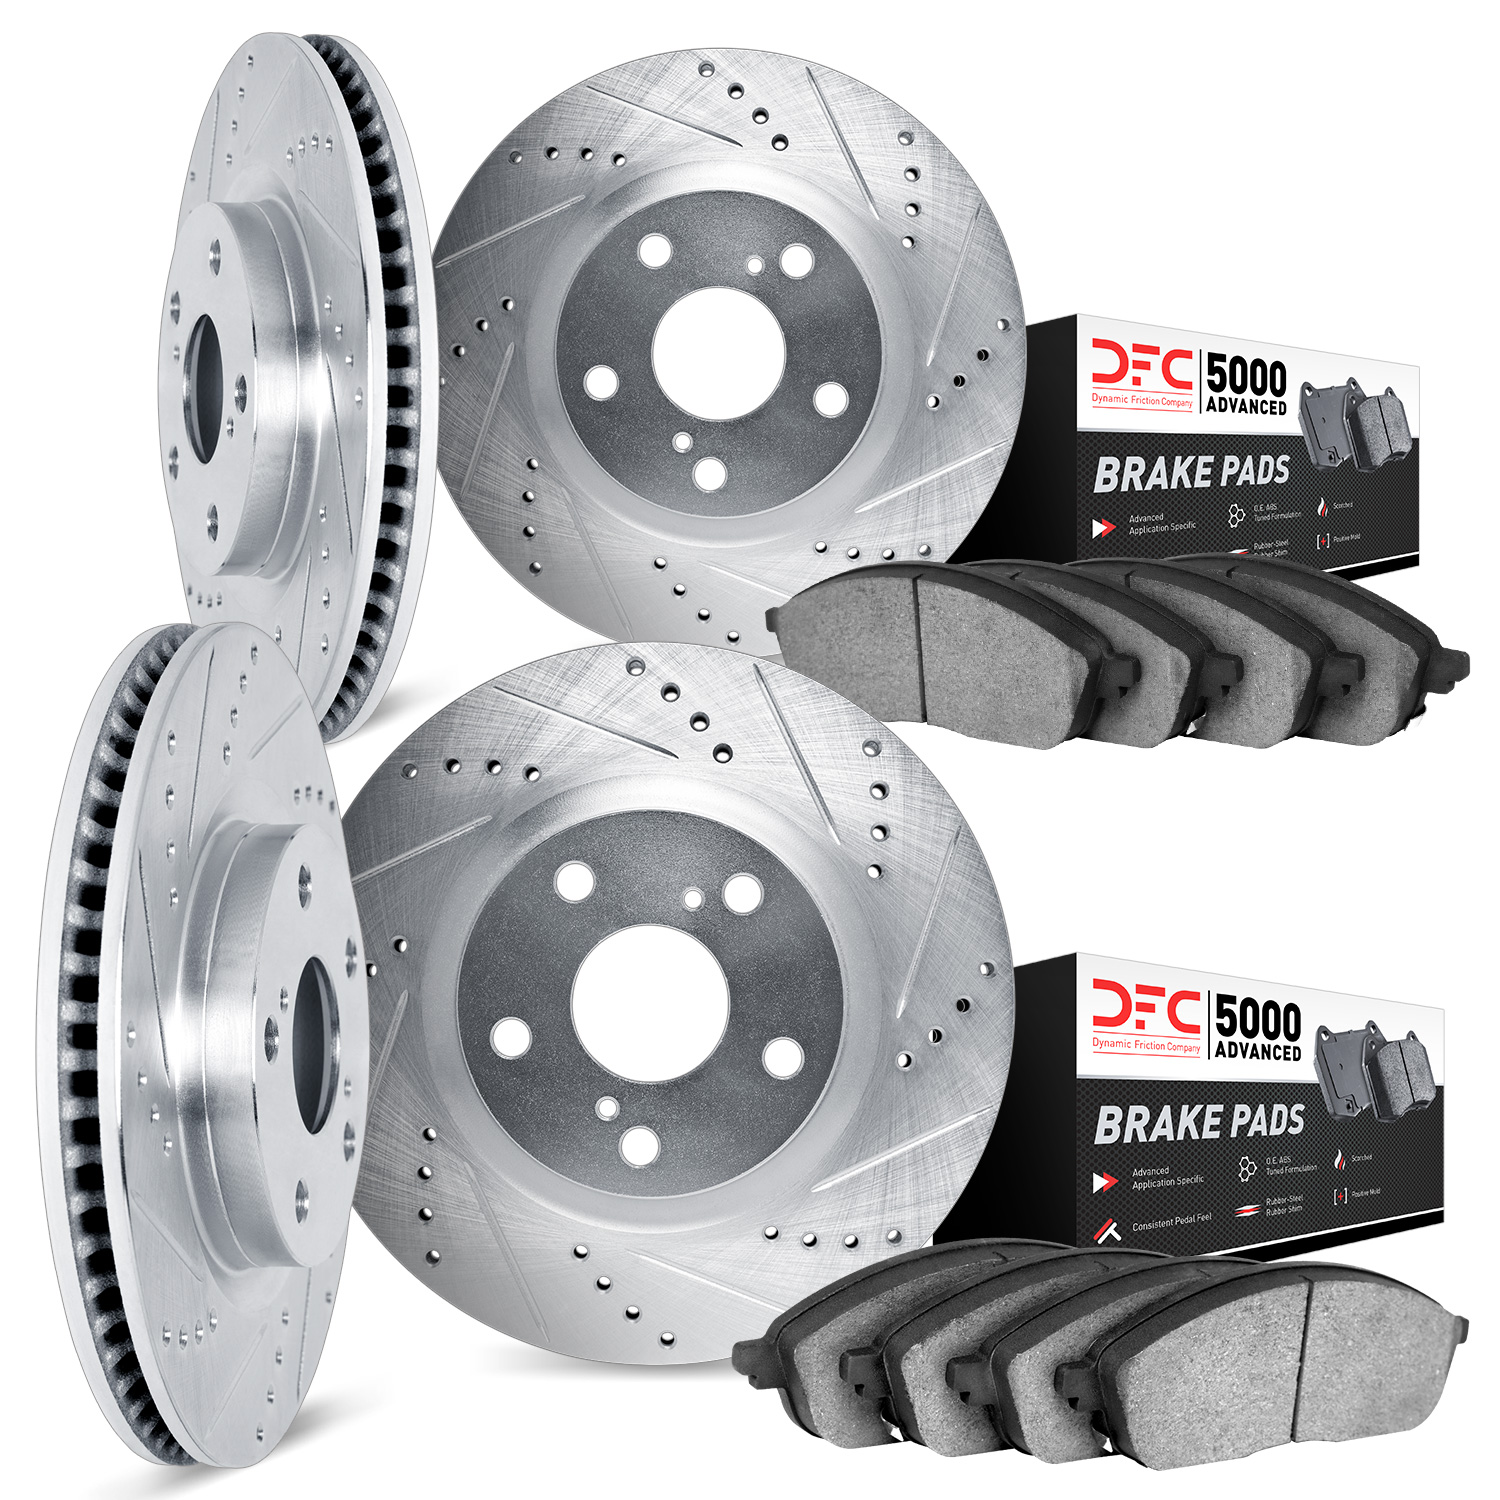 7504-31008 Drilled/Slotted Brake Rotors w/5000 Advanced Brake Pads Kit [Silver], 2001-2005 BMW, Position: Front and Rear